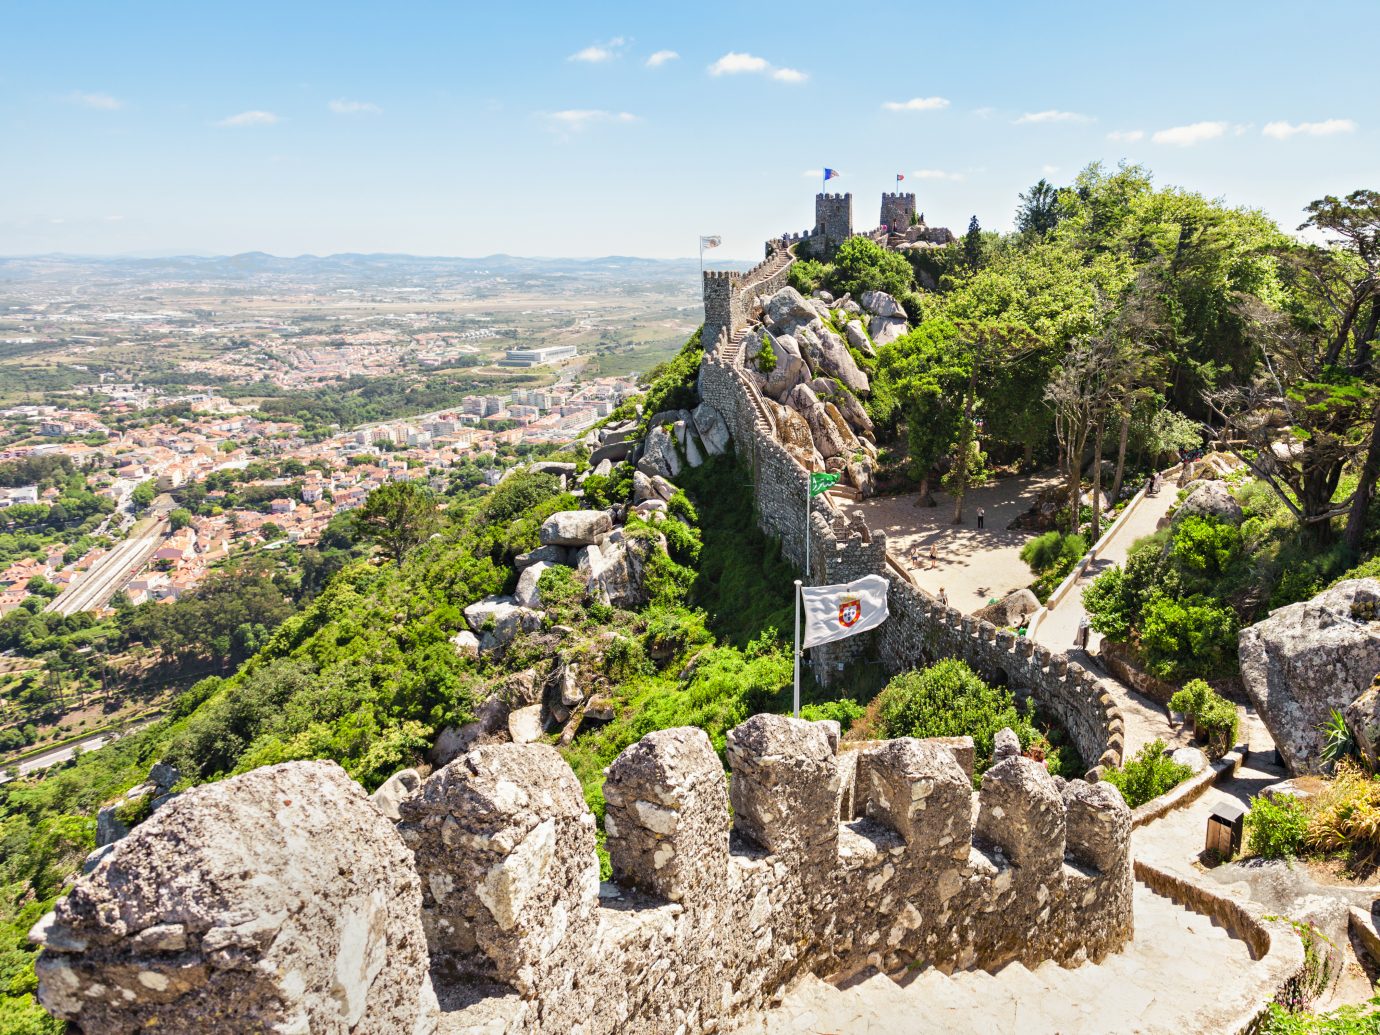 The Castle of the Moors is a hilltop medieval castle in Sintra, Portugal